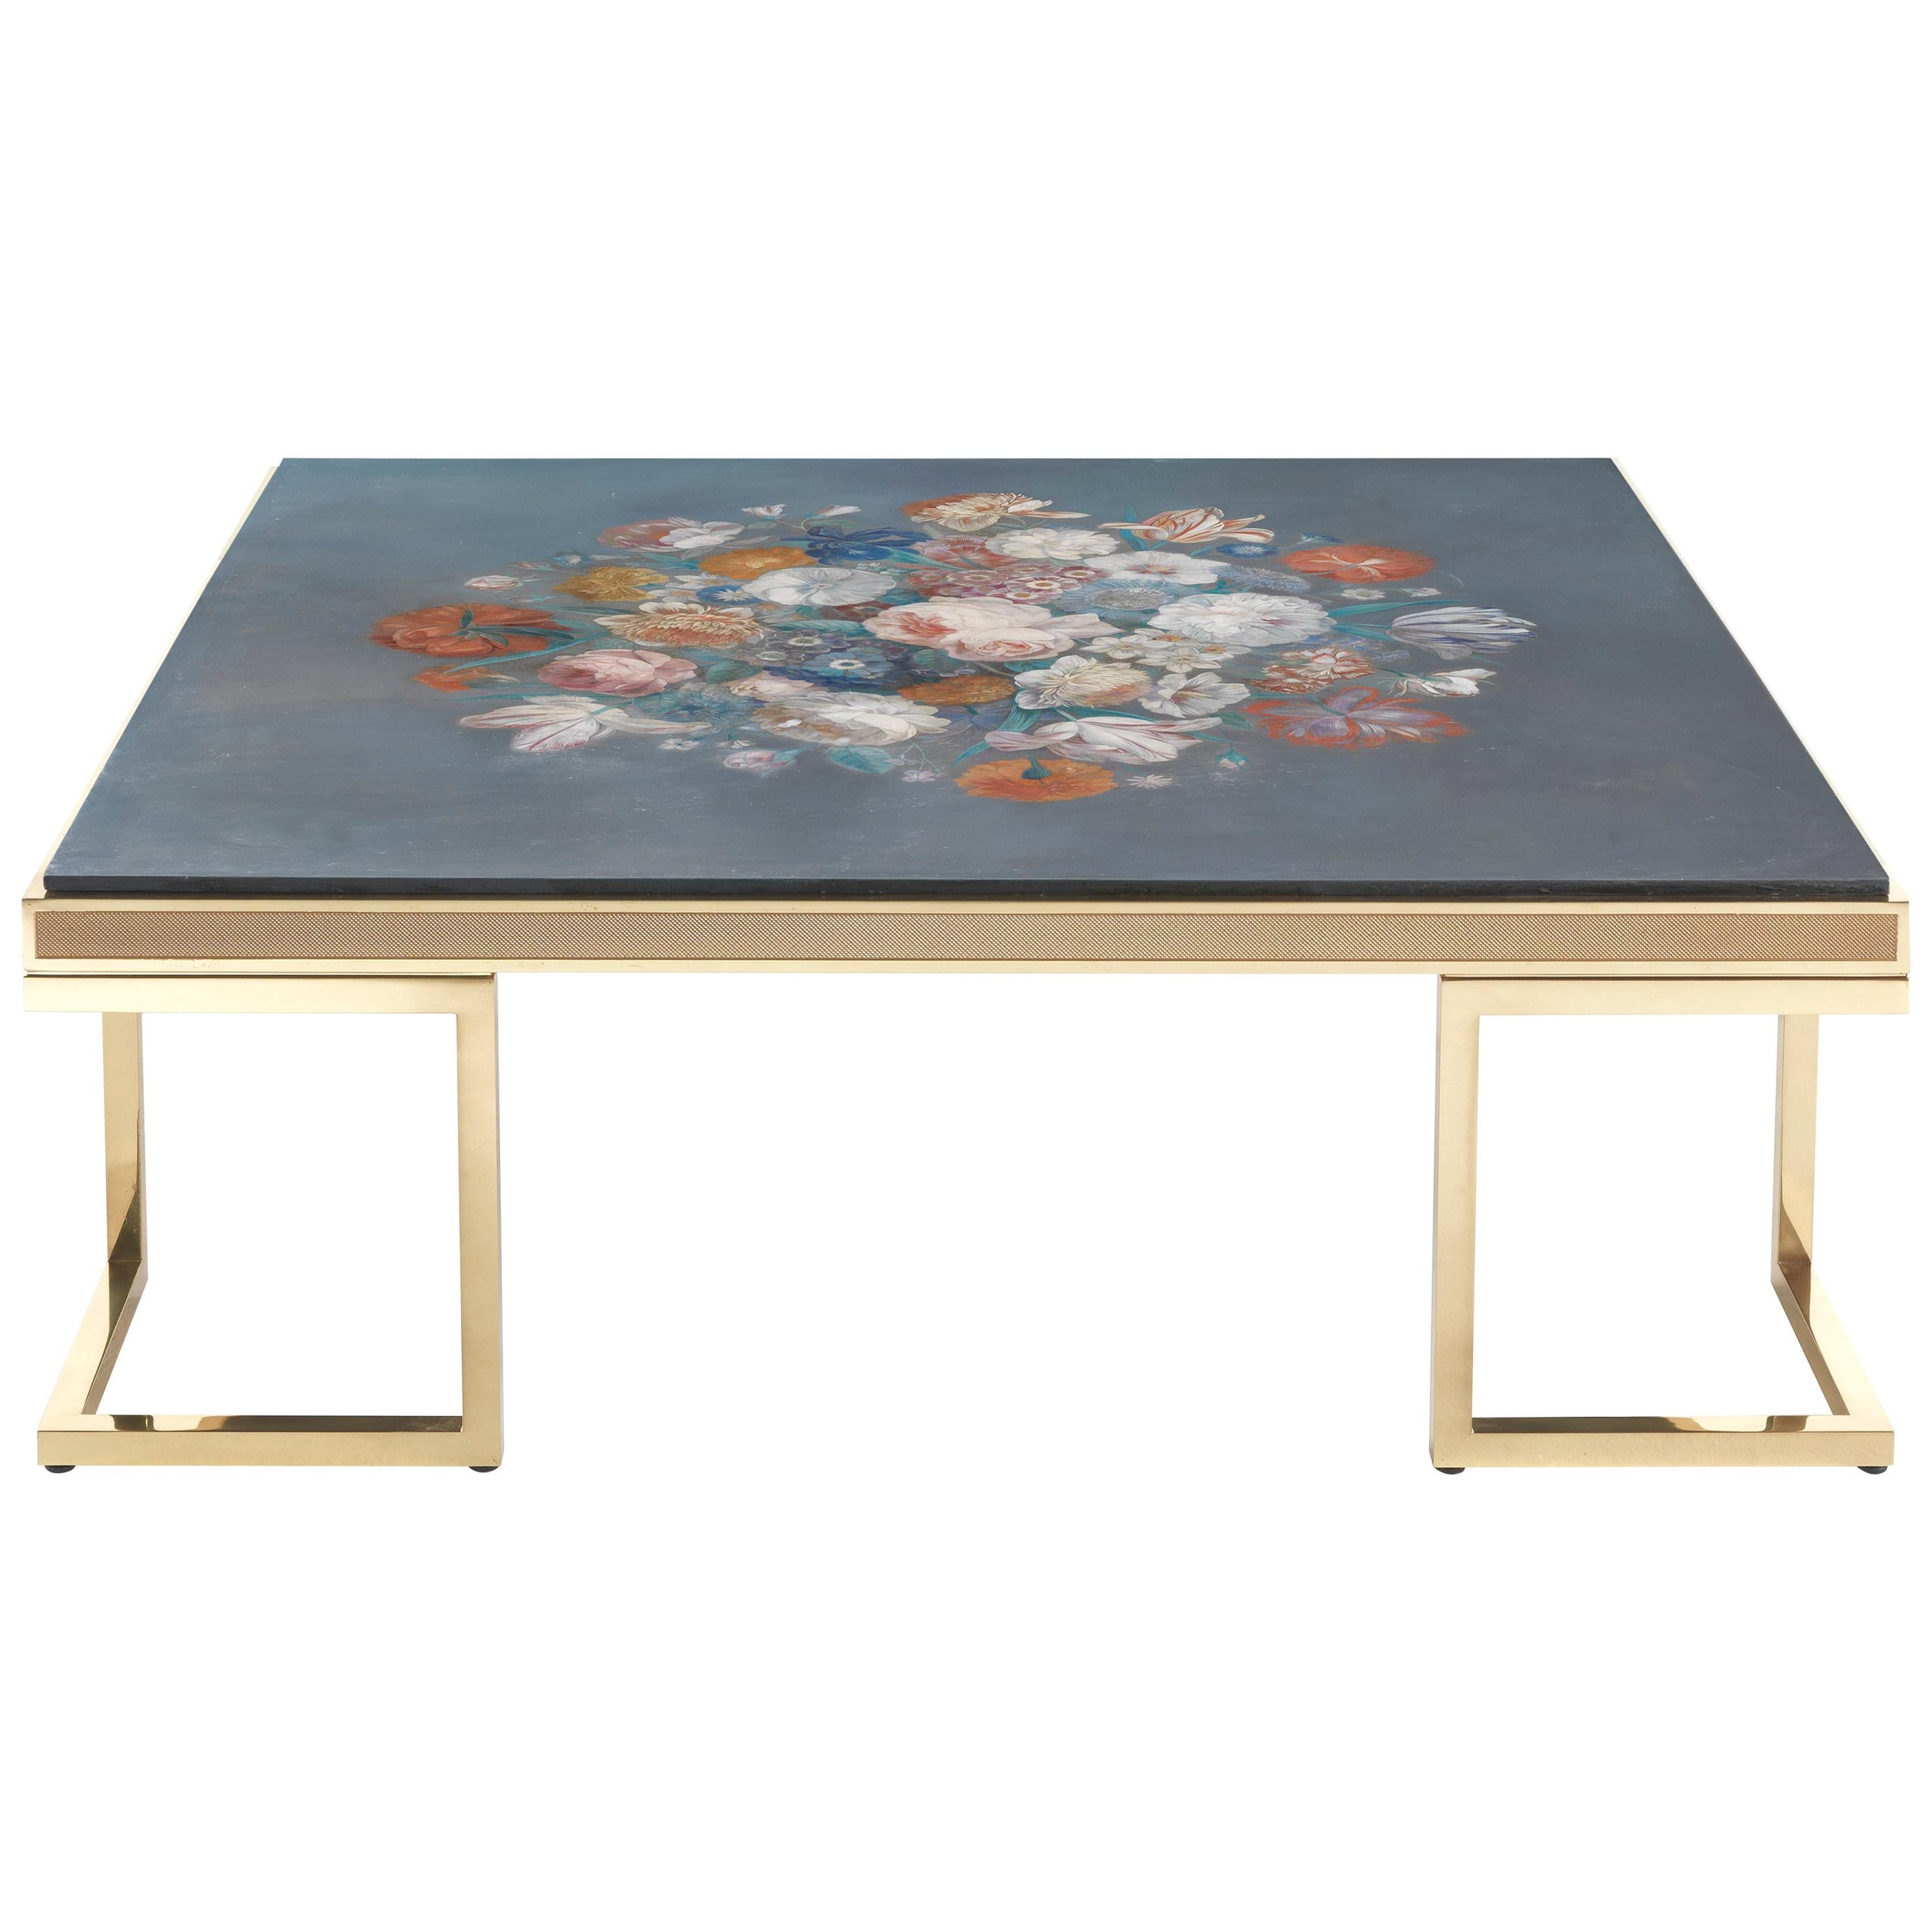 21st Century Folies Square Table in Brass and Top with Hand-made Decorations 